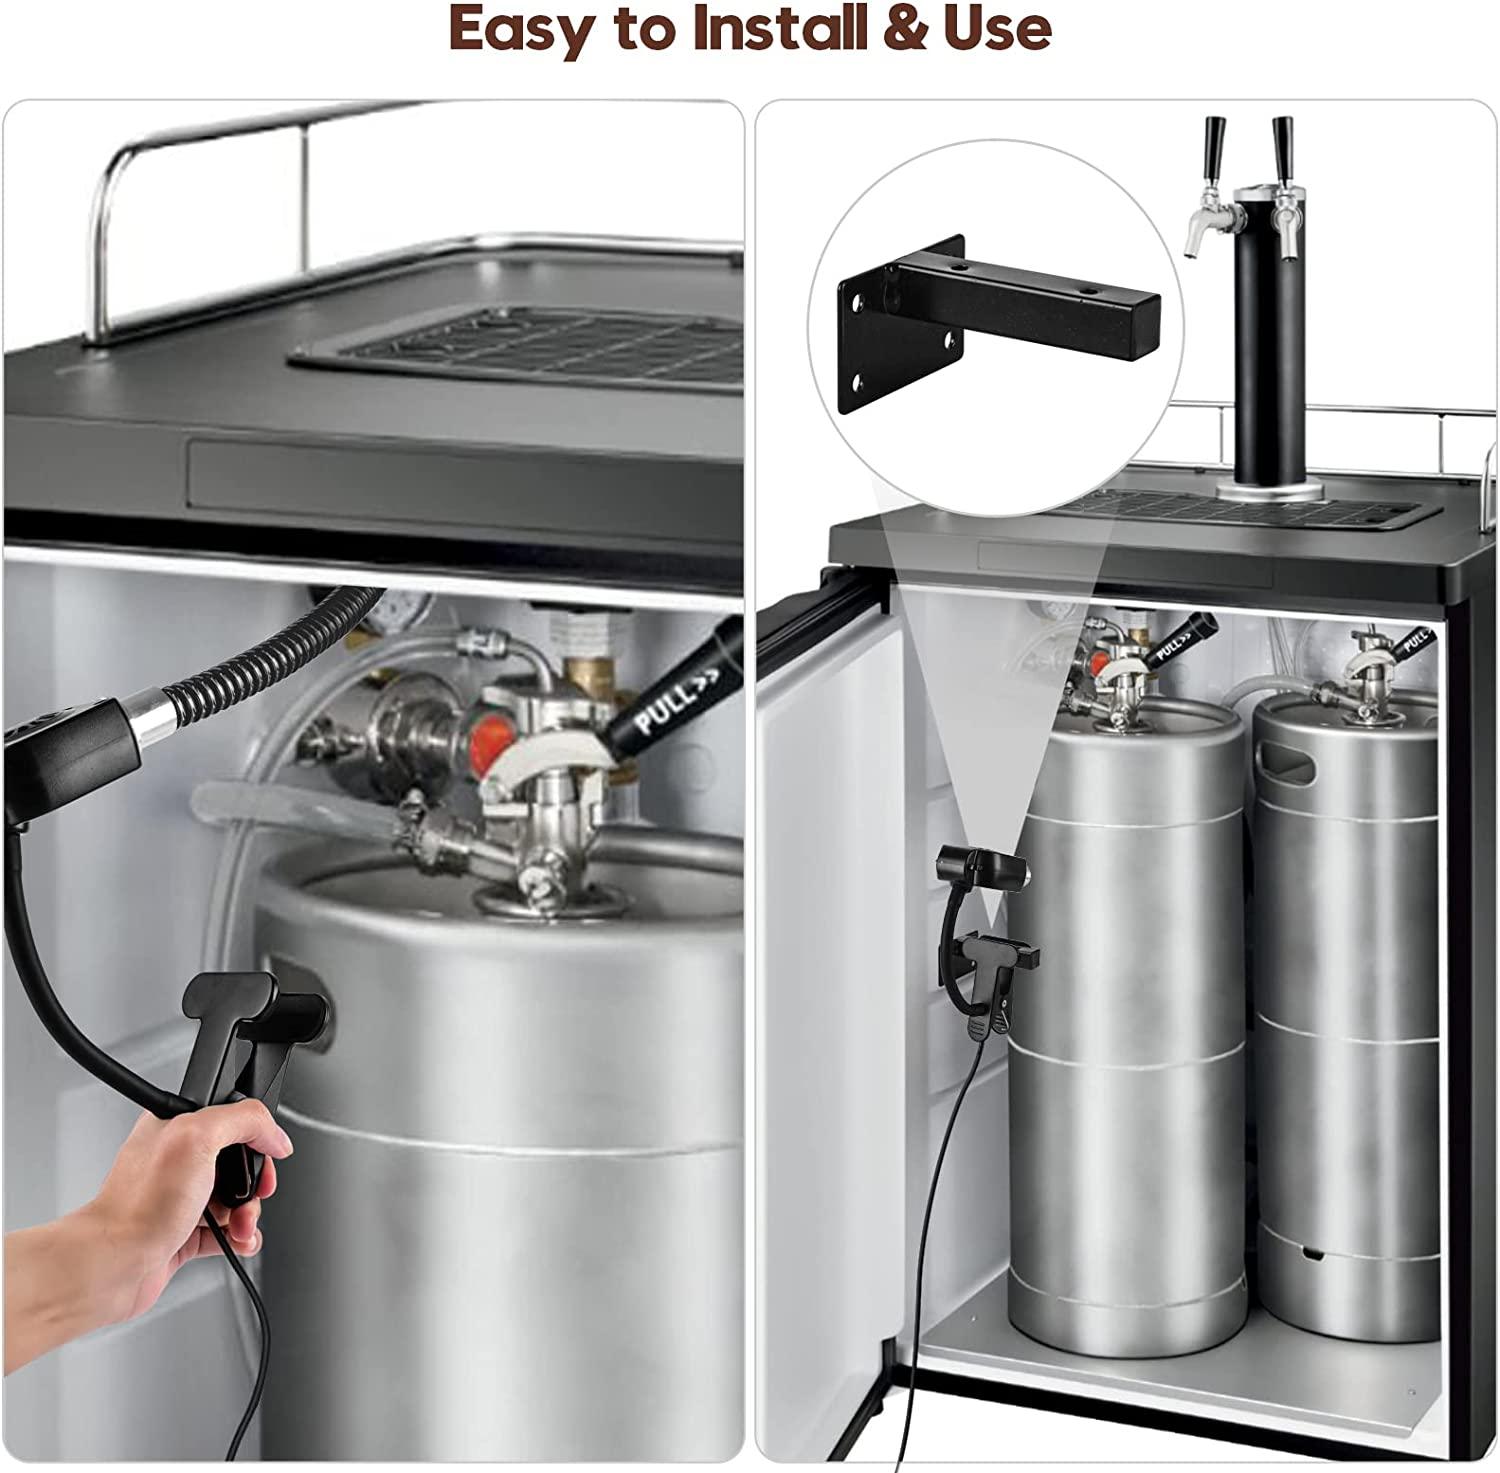 Beer Tower Cooler, briidea Kegerator Tower Cooler with 1/2'' hose and blower, 5V, Noise-free